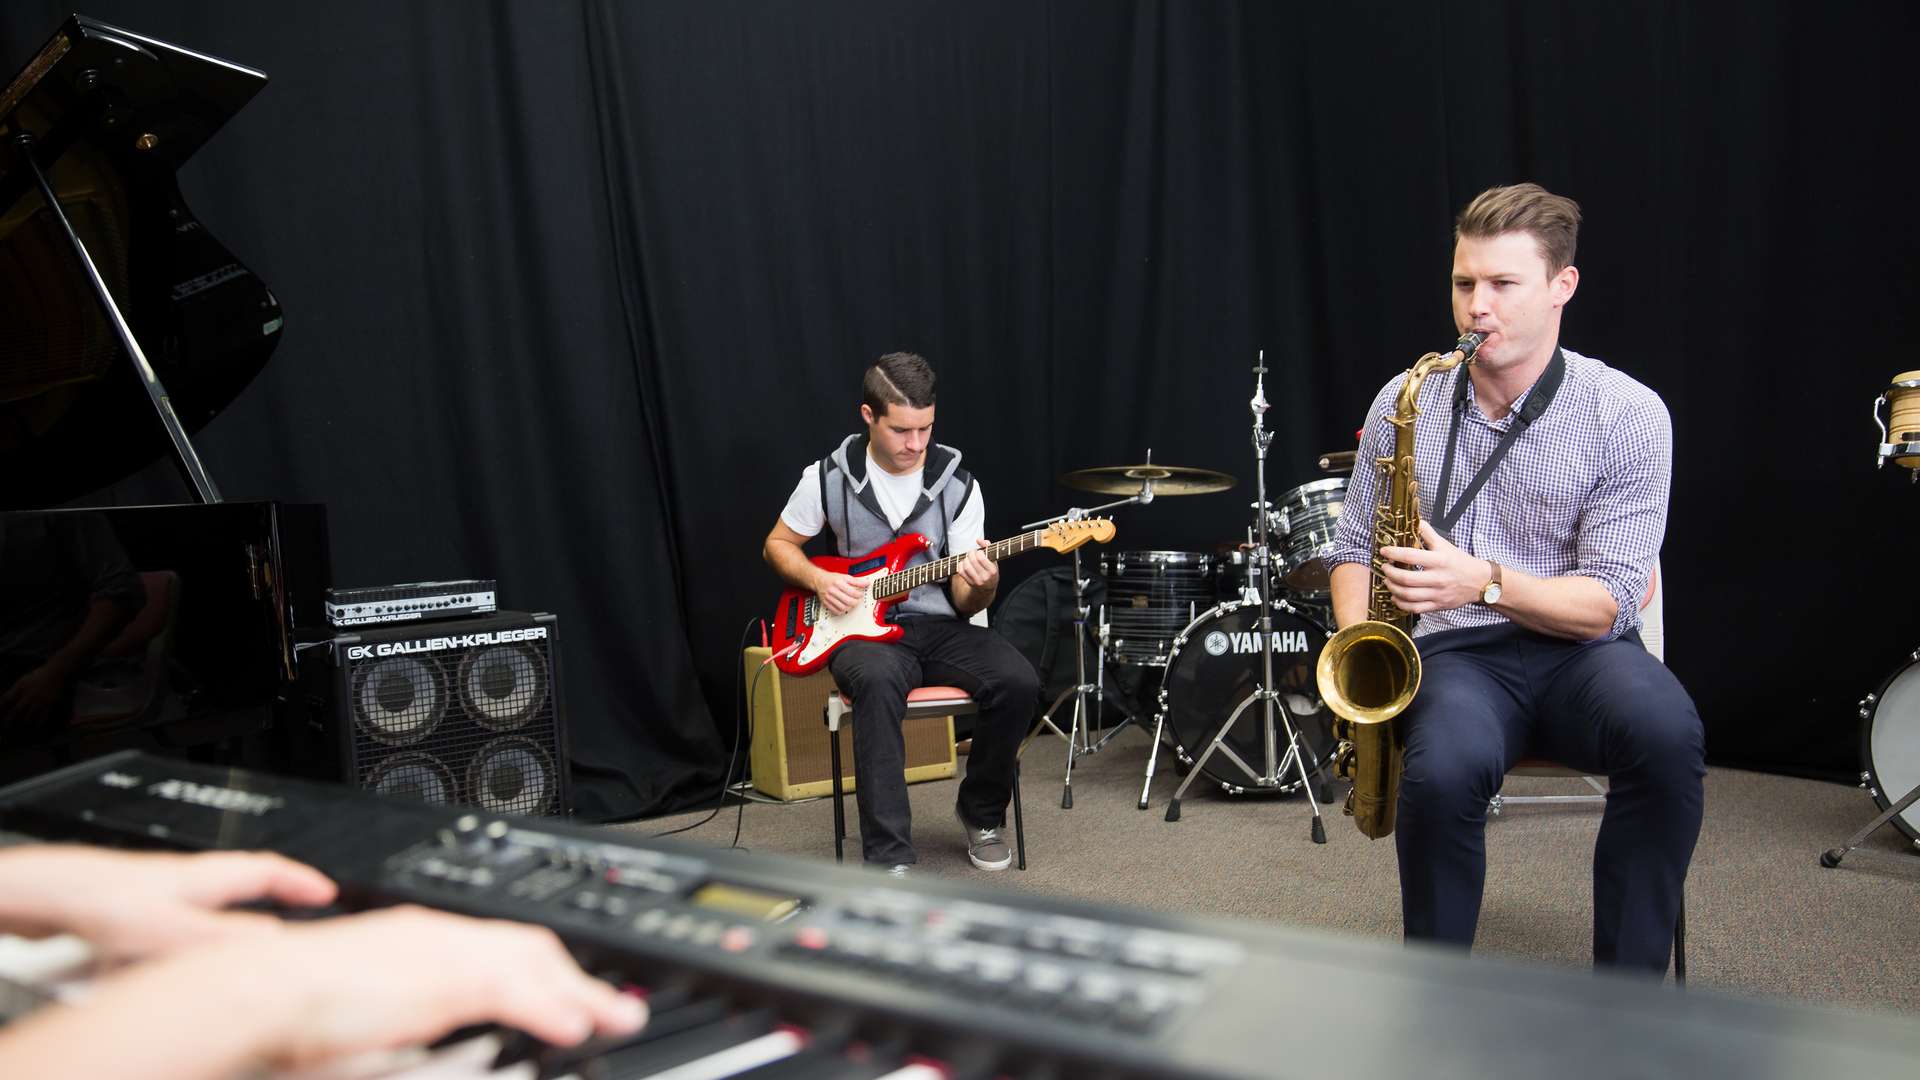 Music degree students in a studio practicing as a band